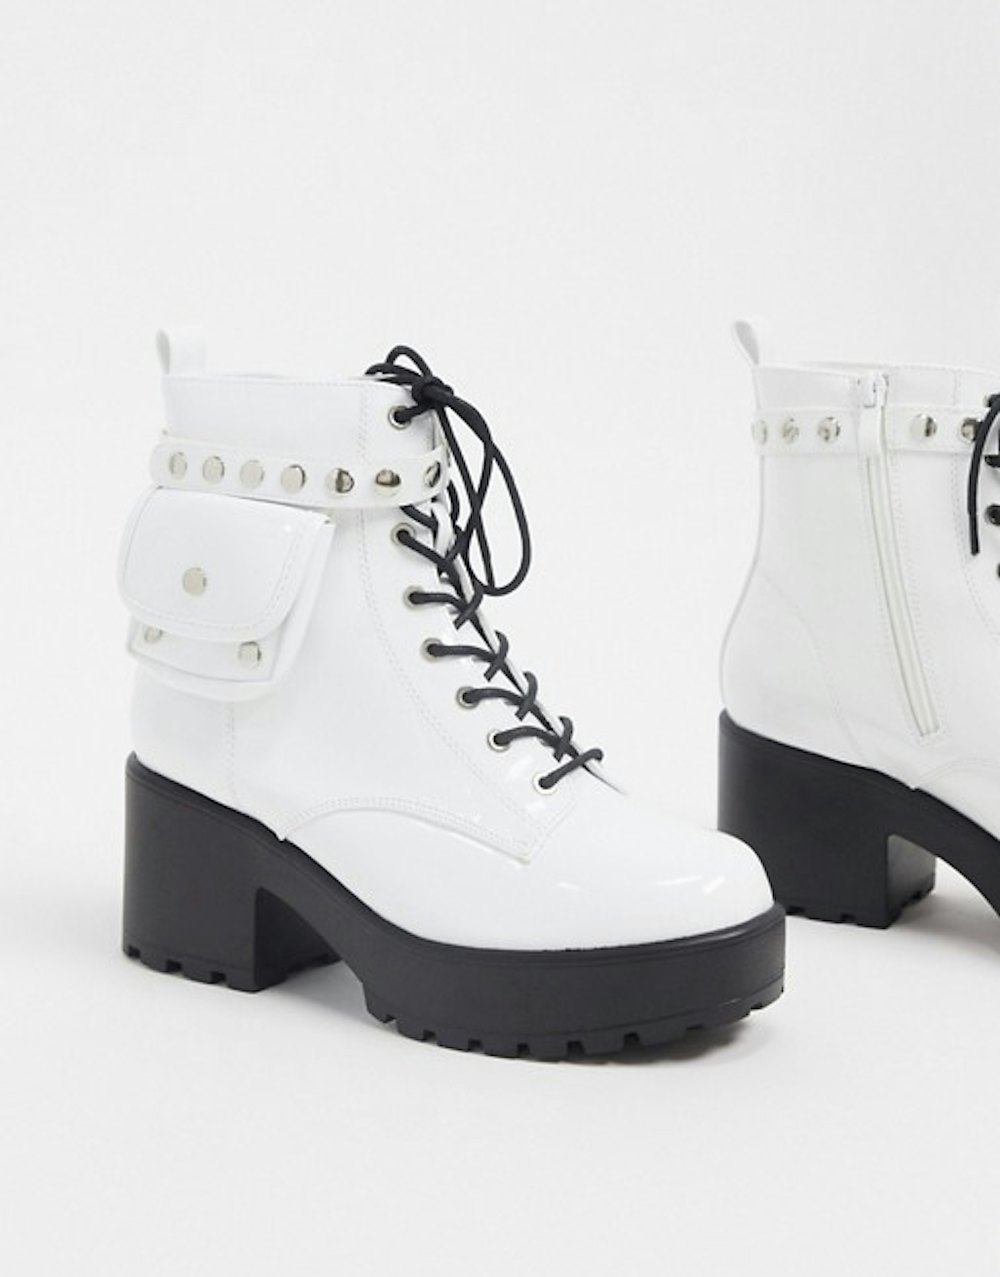 14 Chunky & Platform Combat Boots To Wear For Fall